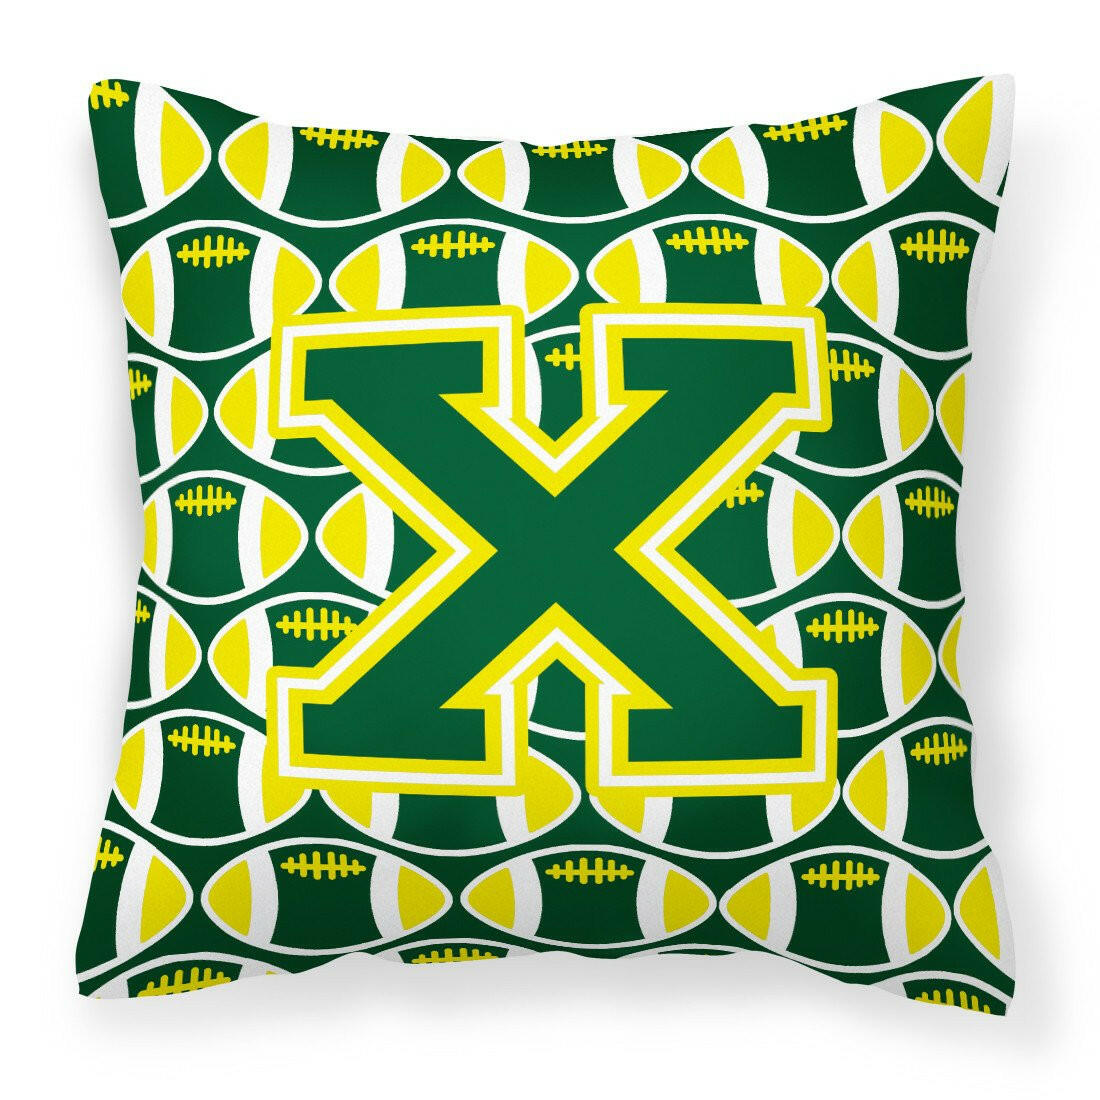 Letter X Football Green and Yellow Fabric Decorative Pillow CJ1075-XPW1414 by Caroline's Treasures